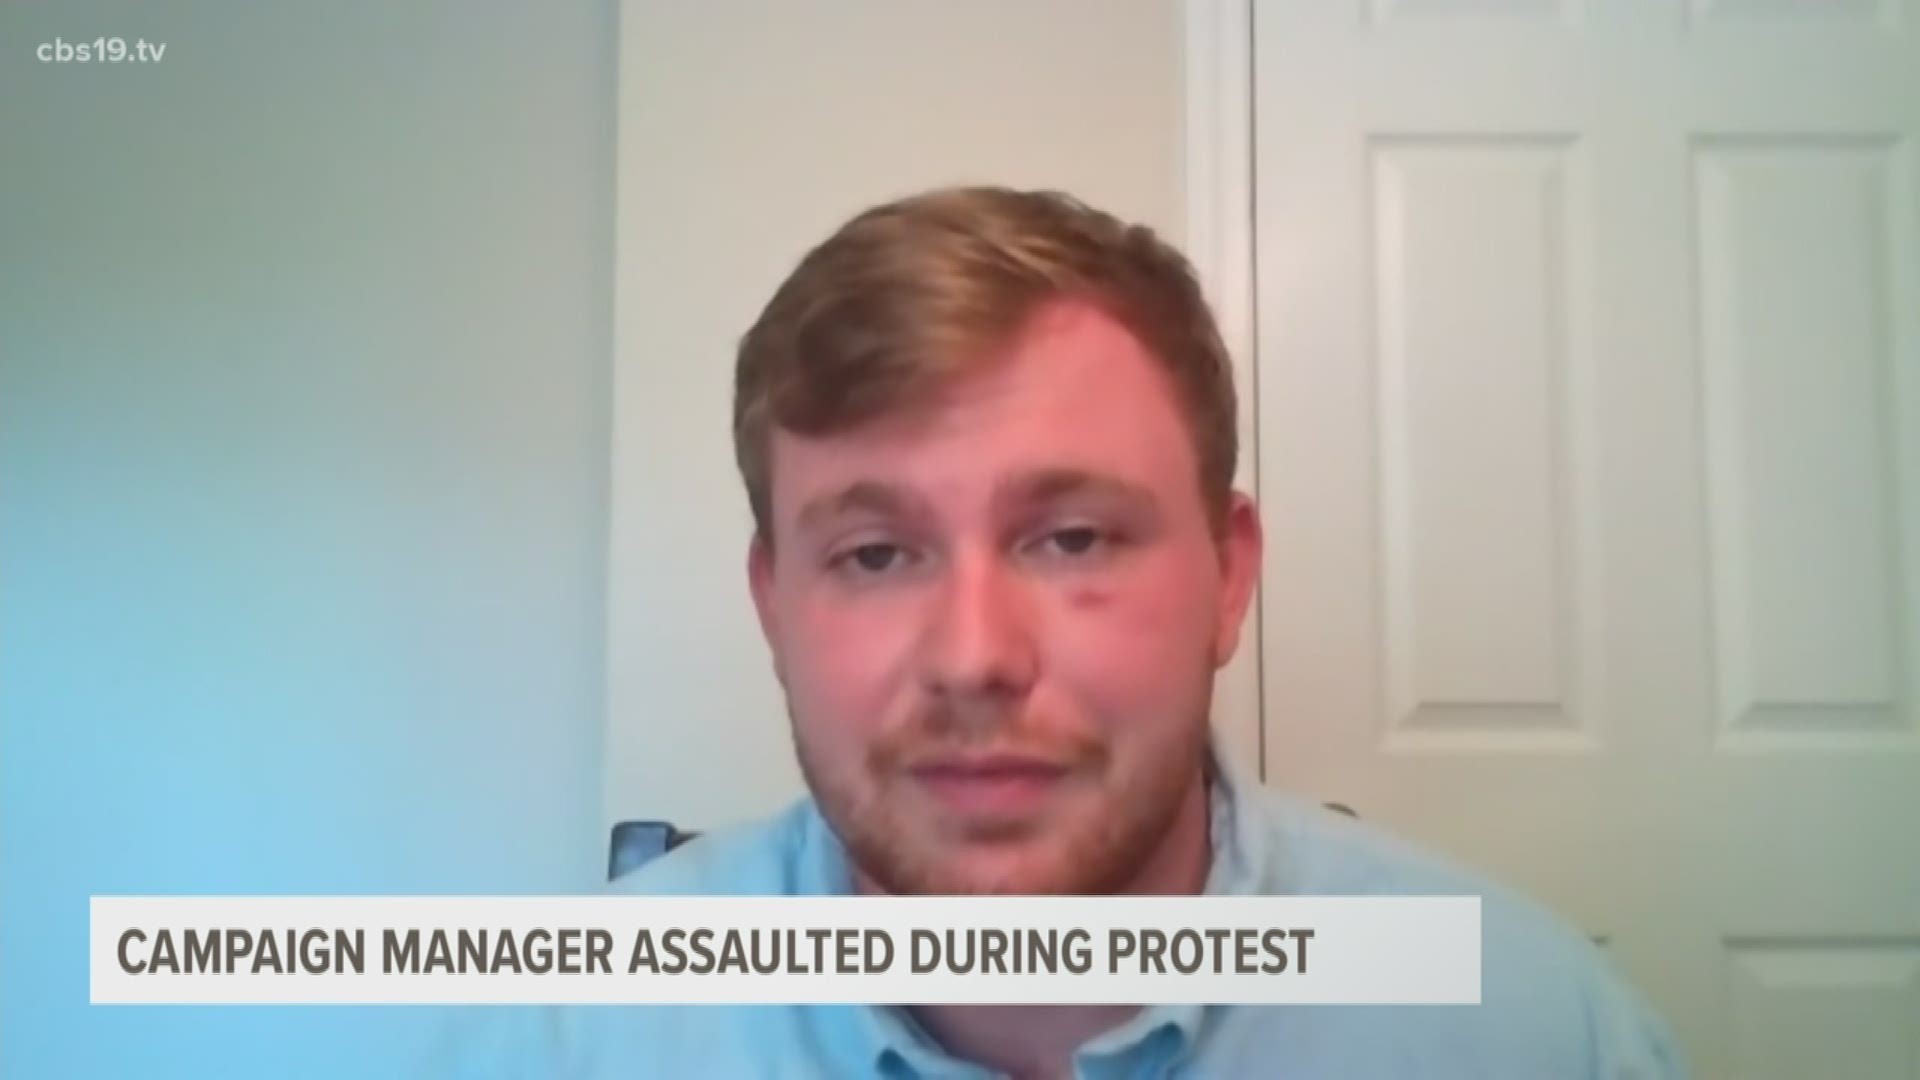 Hank Gilbert's campaign manager Ryan Miller said he was assaulted by five men during the #ProtestPortland rally.